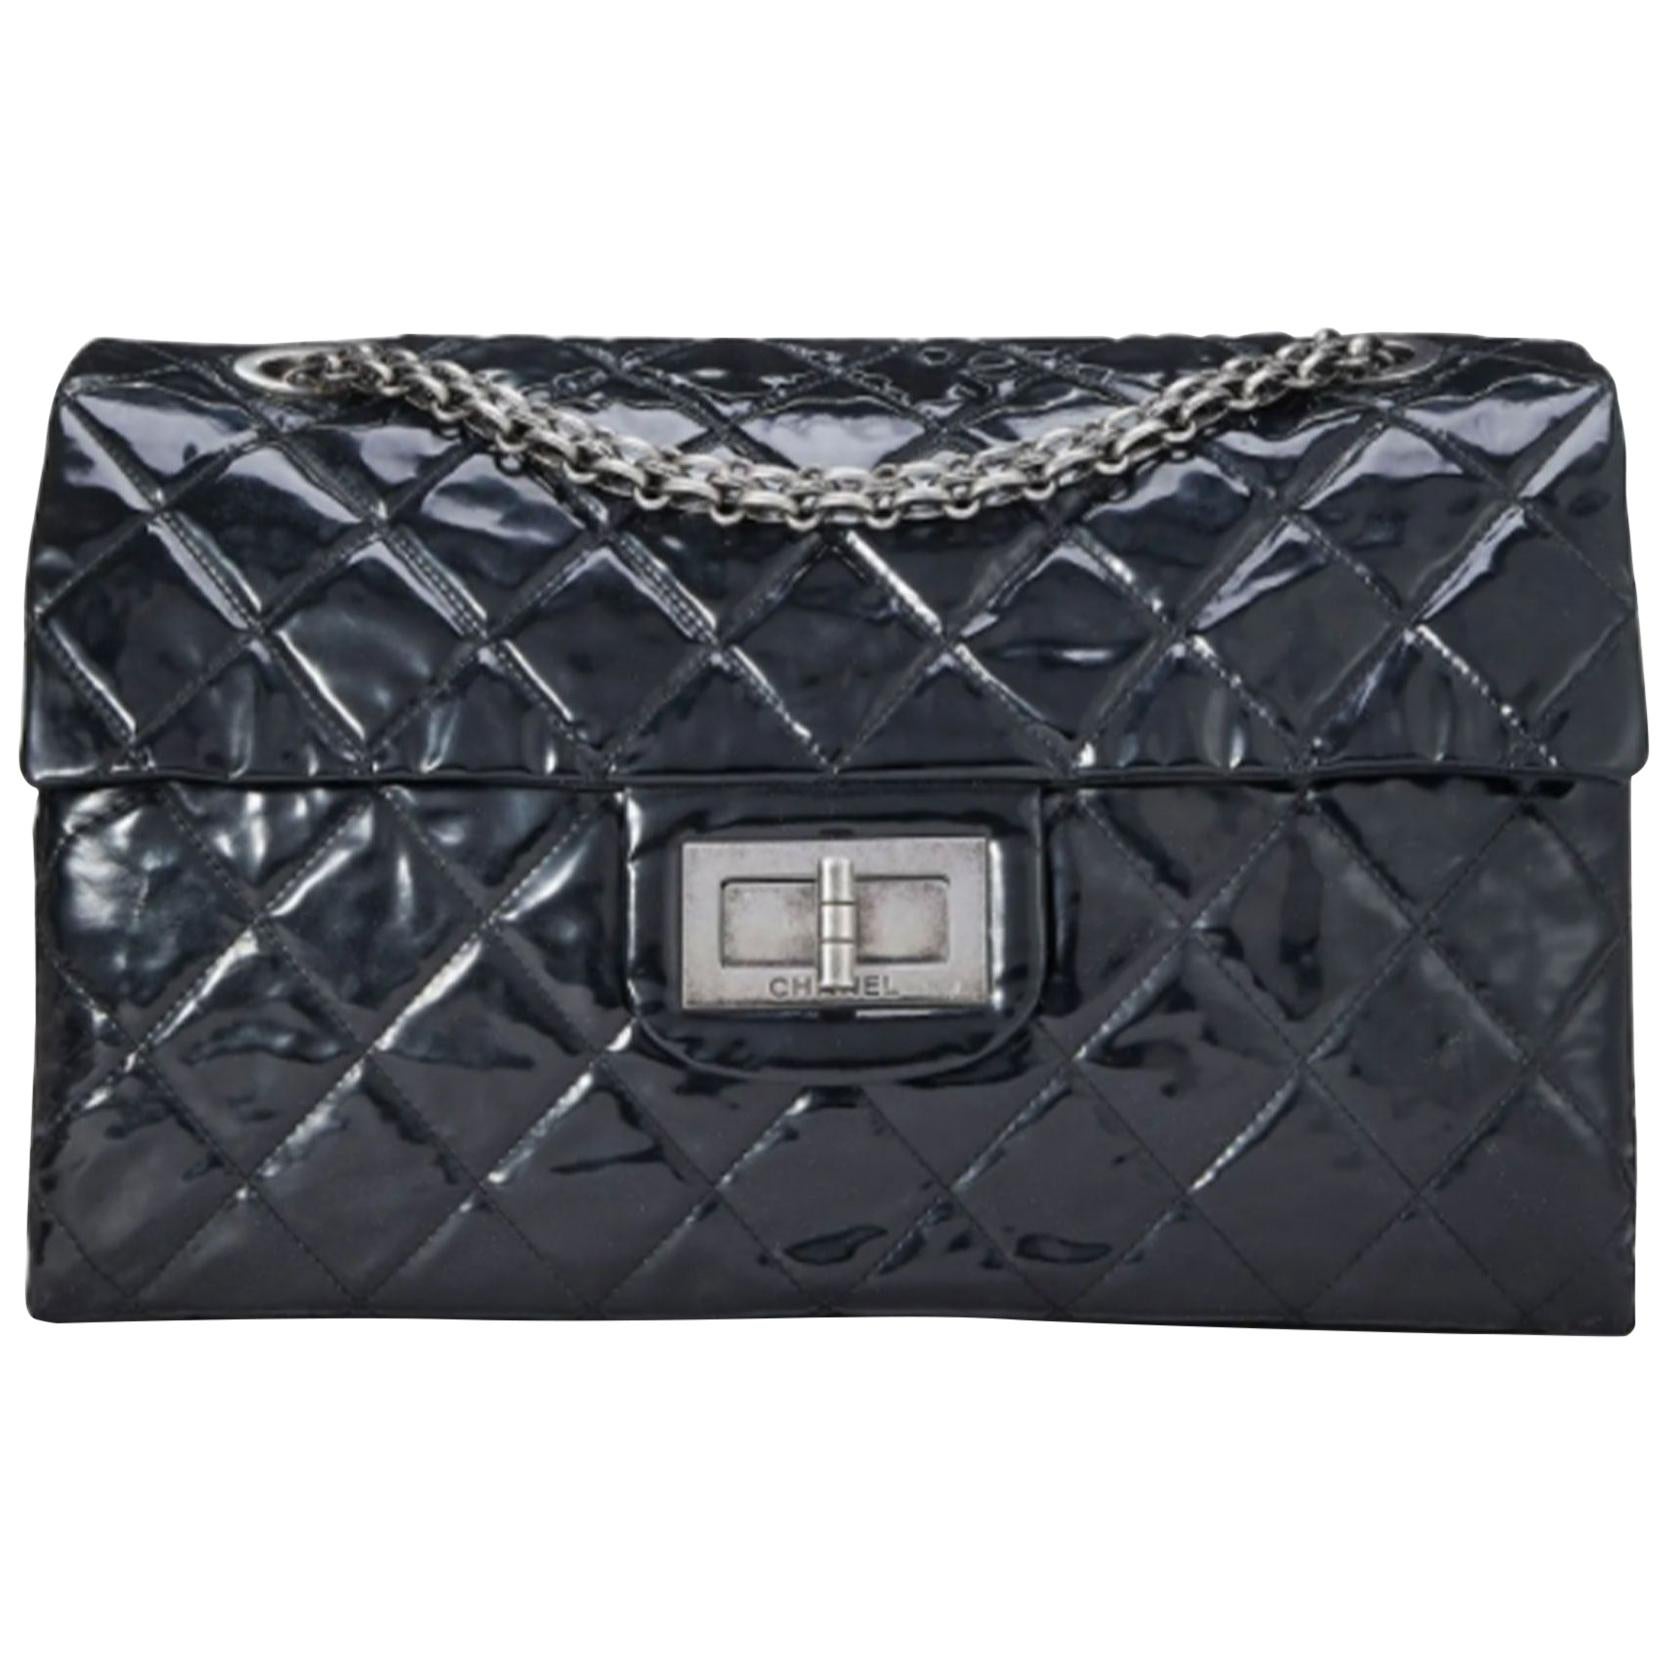 Chanel Vintage Black Quilted Patent Leather Reissue Flap Bag XL